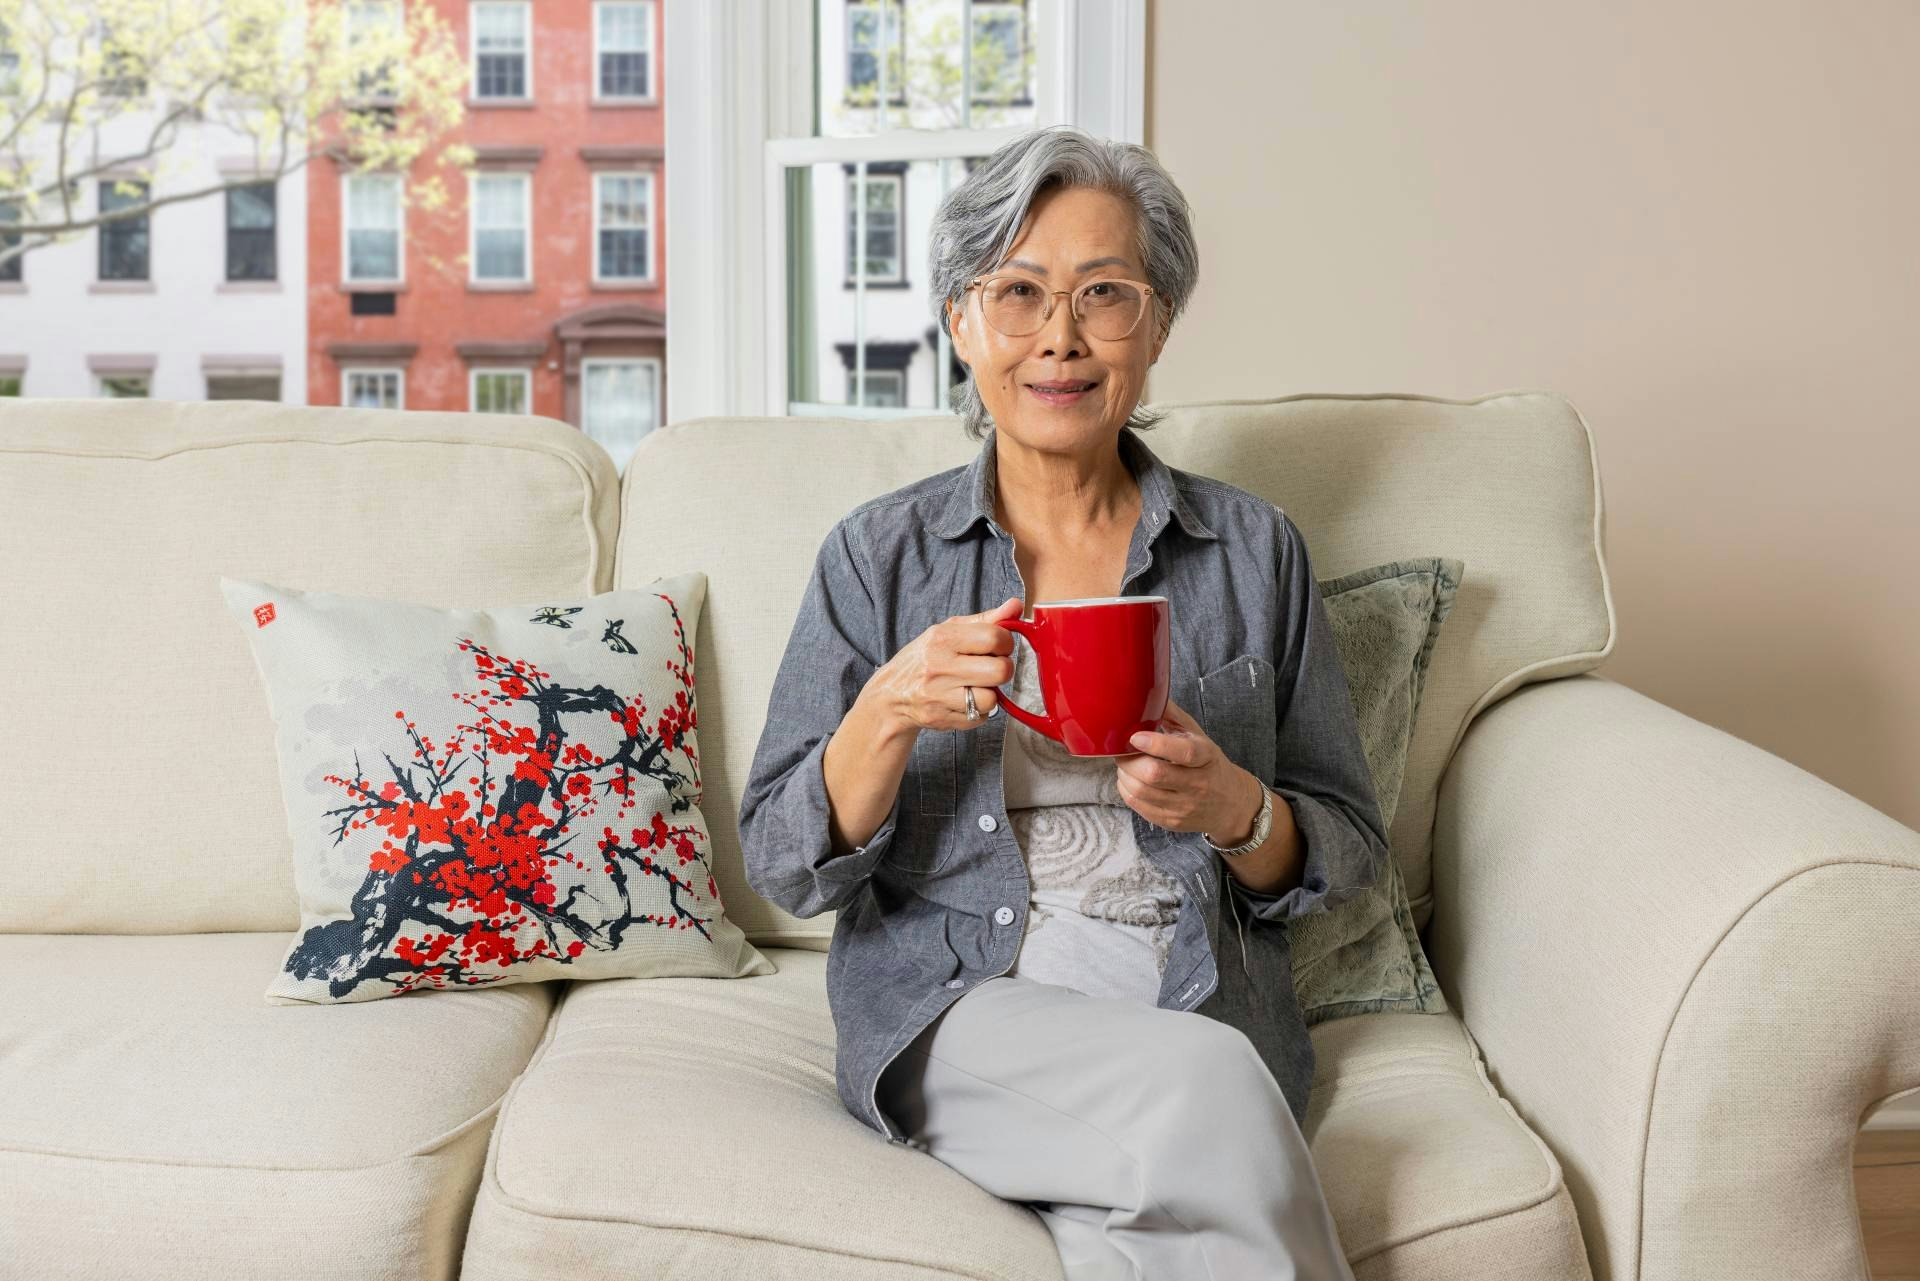 A woman sits on a couch. She wears glasses and holds a red mug